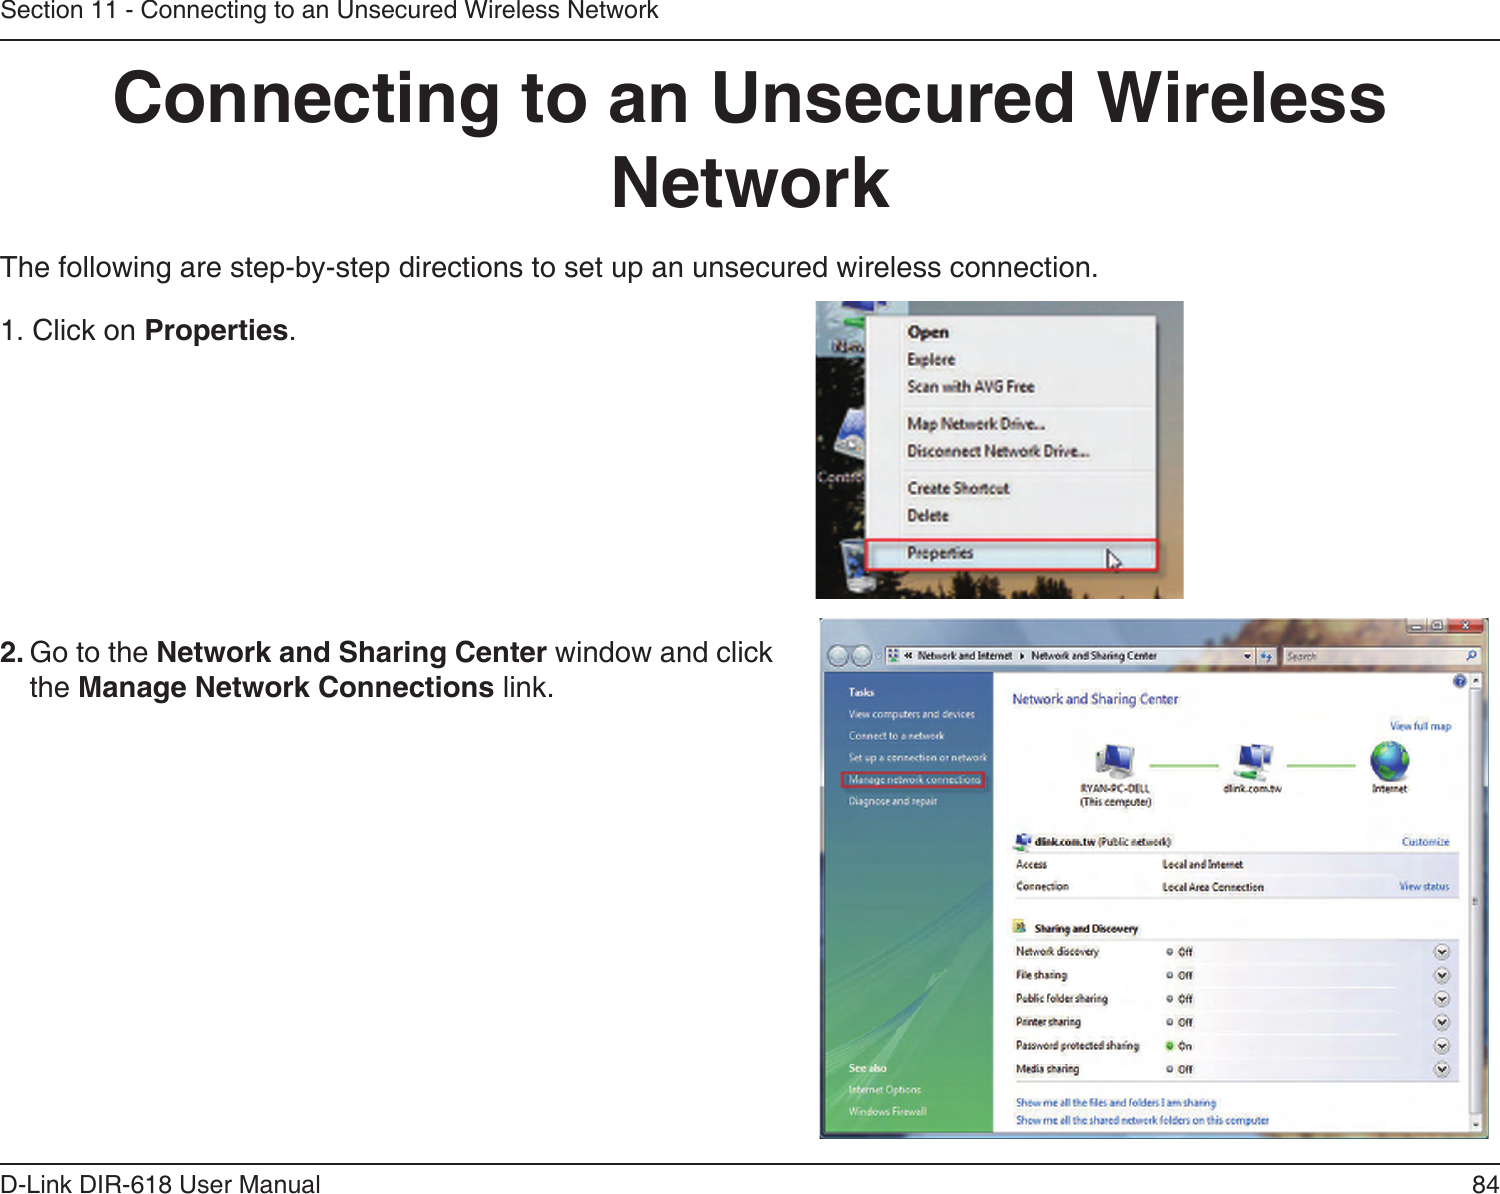 84D-Link DIR-618 User ManualSection 11 - Connecting to an Unsecured Wireless NetworkConnecting to an Unsecured Wireless NetworkThe following are step-by-step directions to set up an unsecured wireless connection.2. Go to the Network and Sharing Center window and clickthe Manage Network Connections link. 1. Click on Properties.